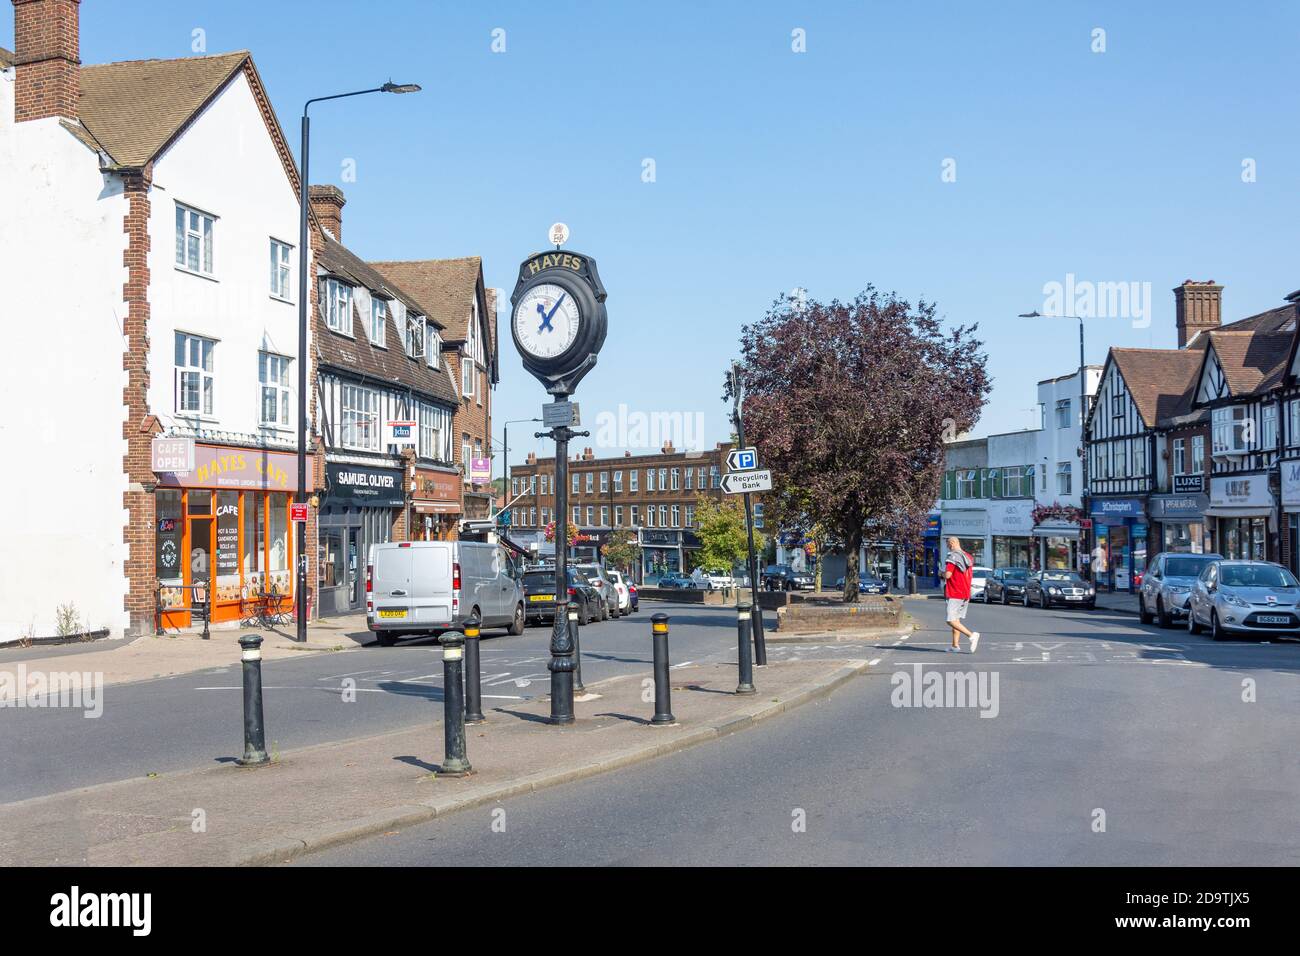 Station Approach, Hayes, London Borough of Bromley, Greater London, Angleterre, Royaume-Uni Banque D'Images